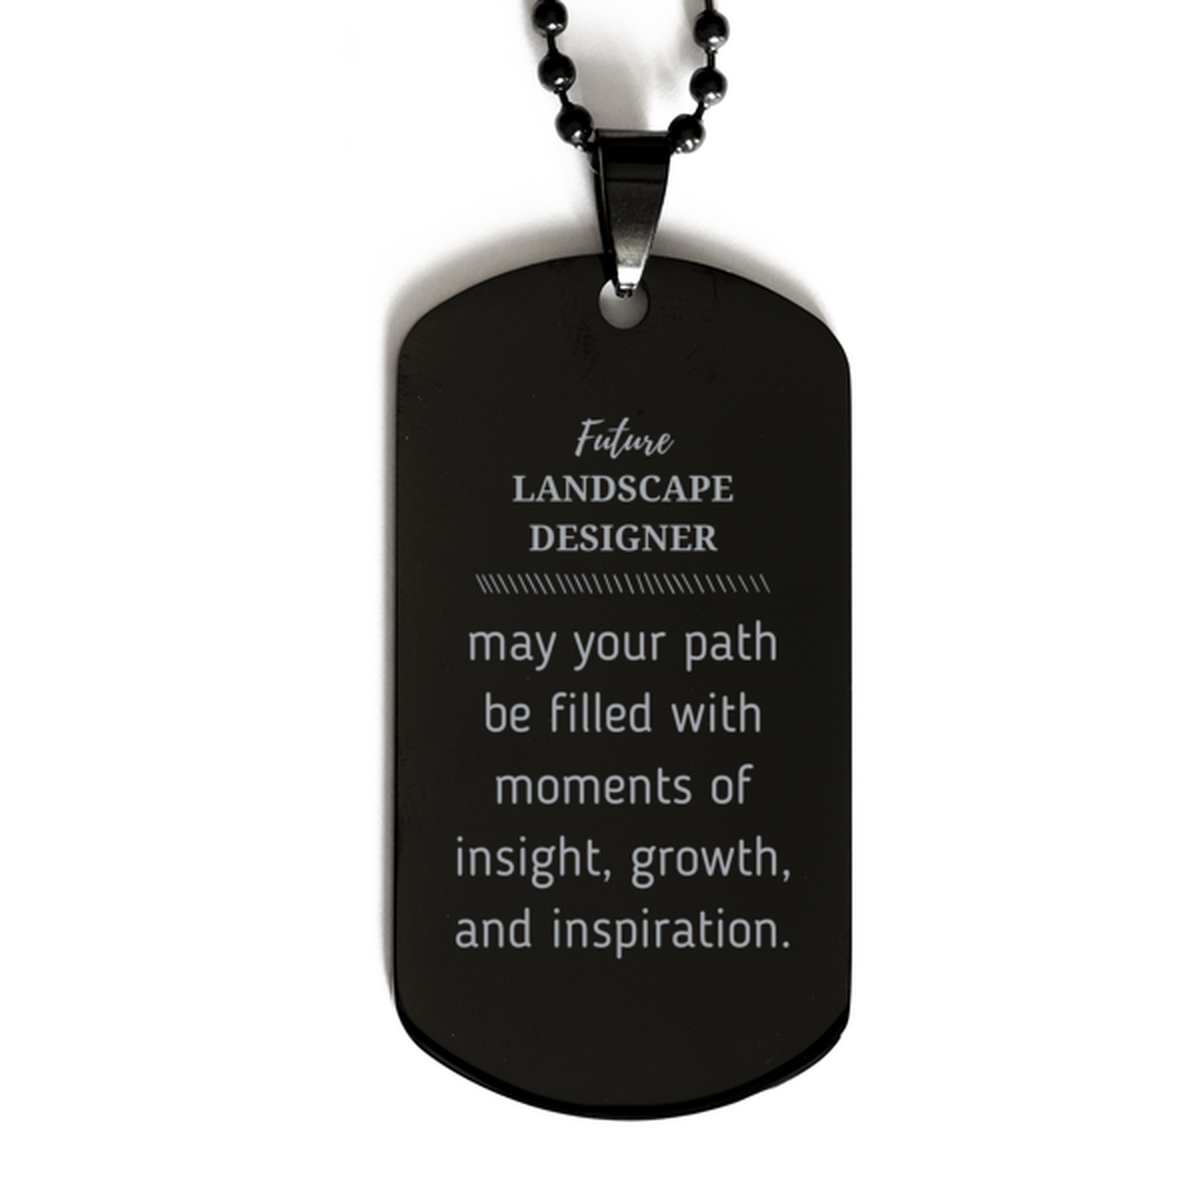 Future Landscape Designer Gifts, May your path be filled with moments of insight, Graduation Gifts for New Landscape Designer, Christmas Unique Black Dog Tag For Men, Women, Friends